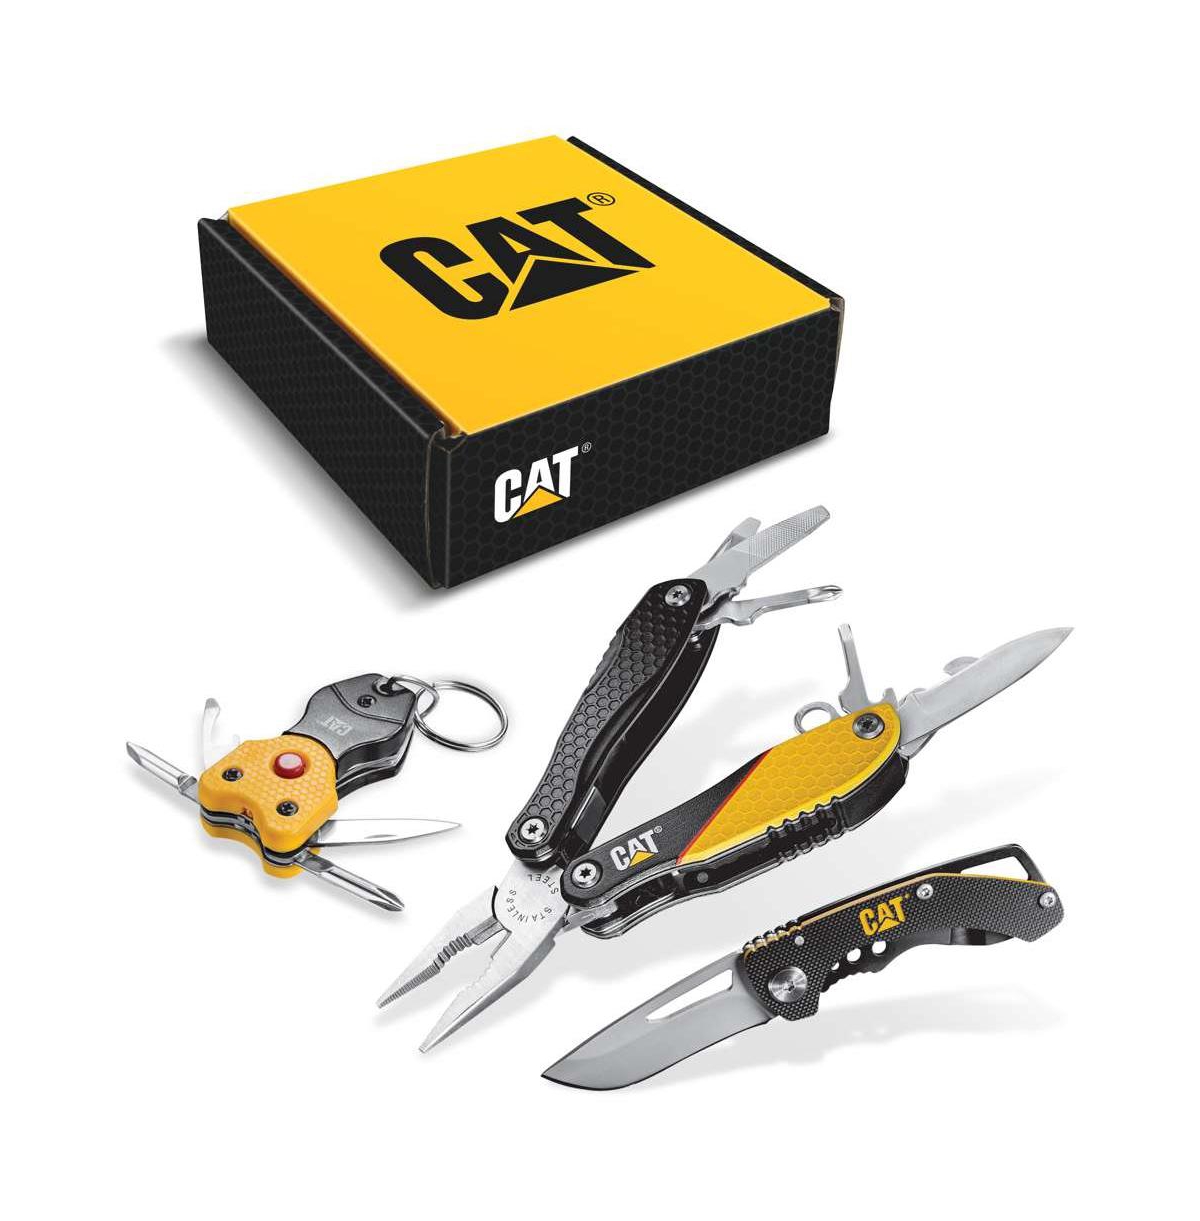 3 Piece 12-in-1 Multi-Tool, Knife, and Multi-Tool Key Chain Box Set - Yellow